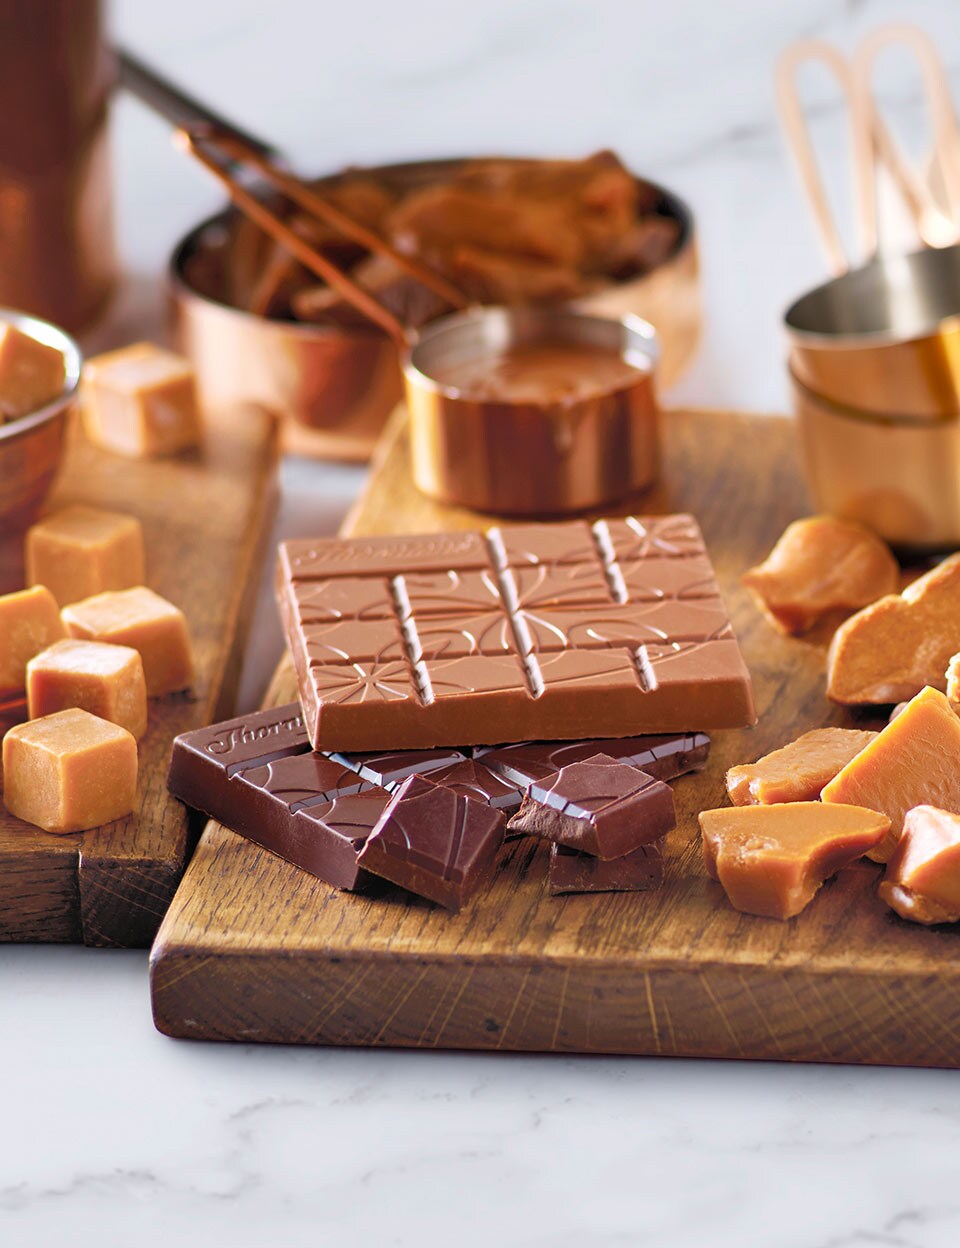 An assortment of chocolate and toffee on wooden chopping boards.